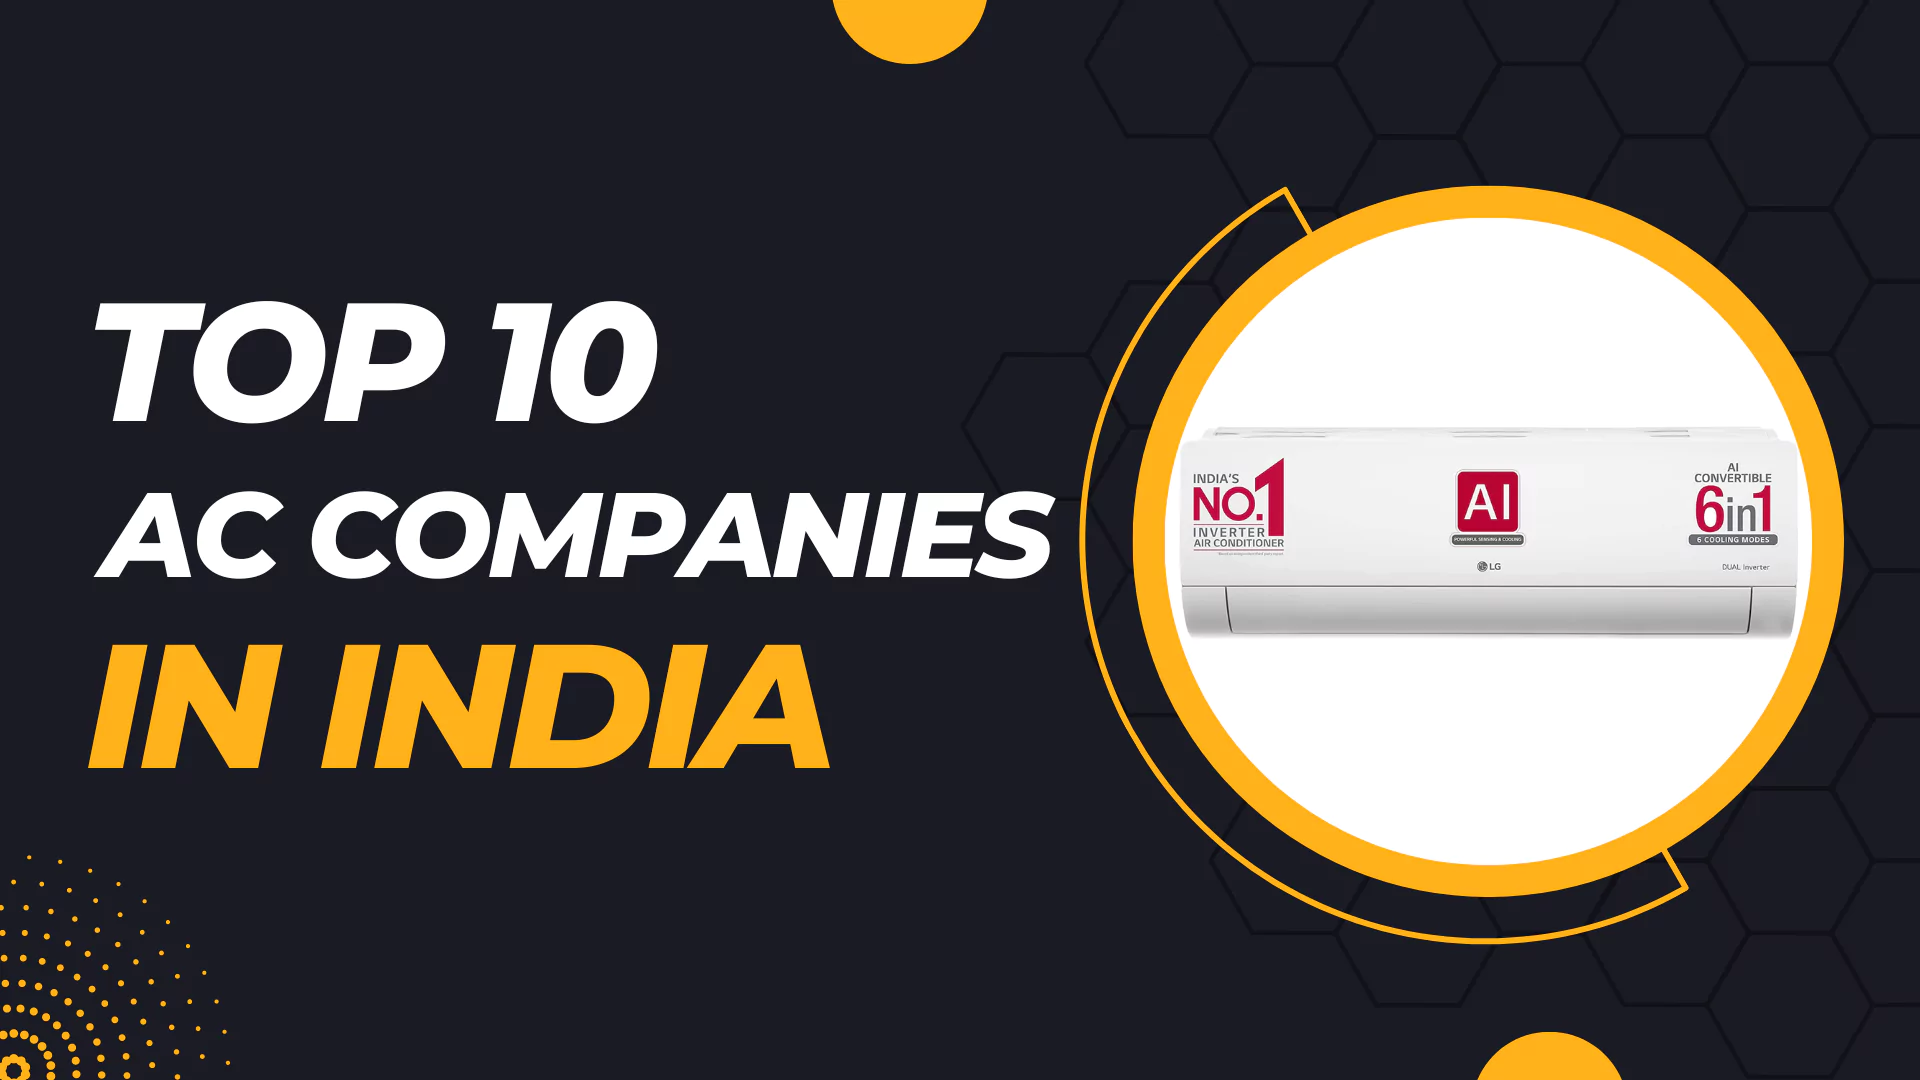 Top 10 AC Companies in India